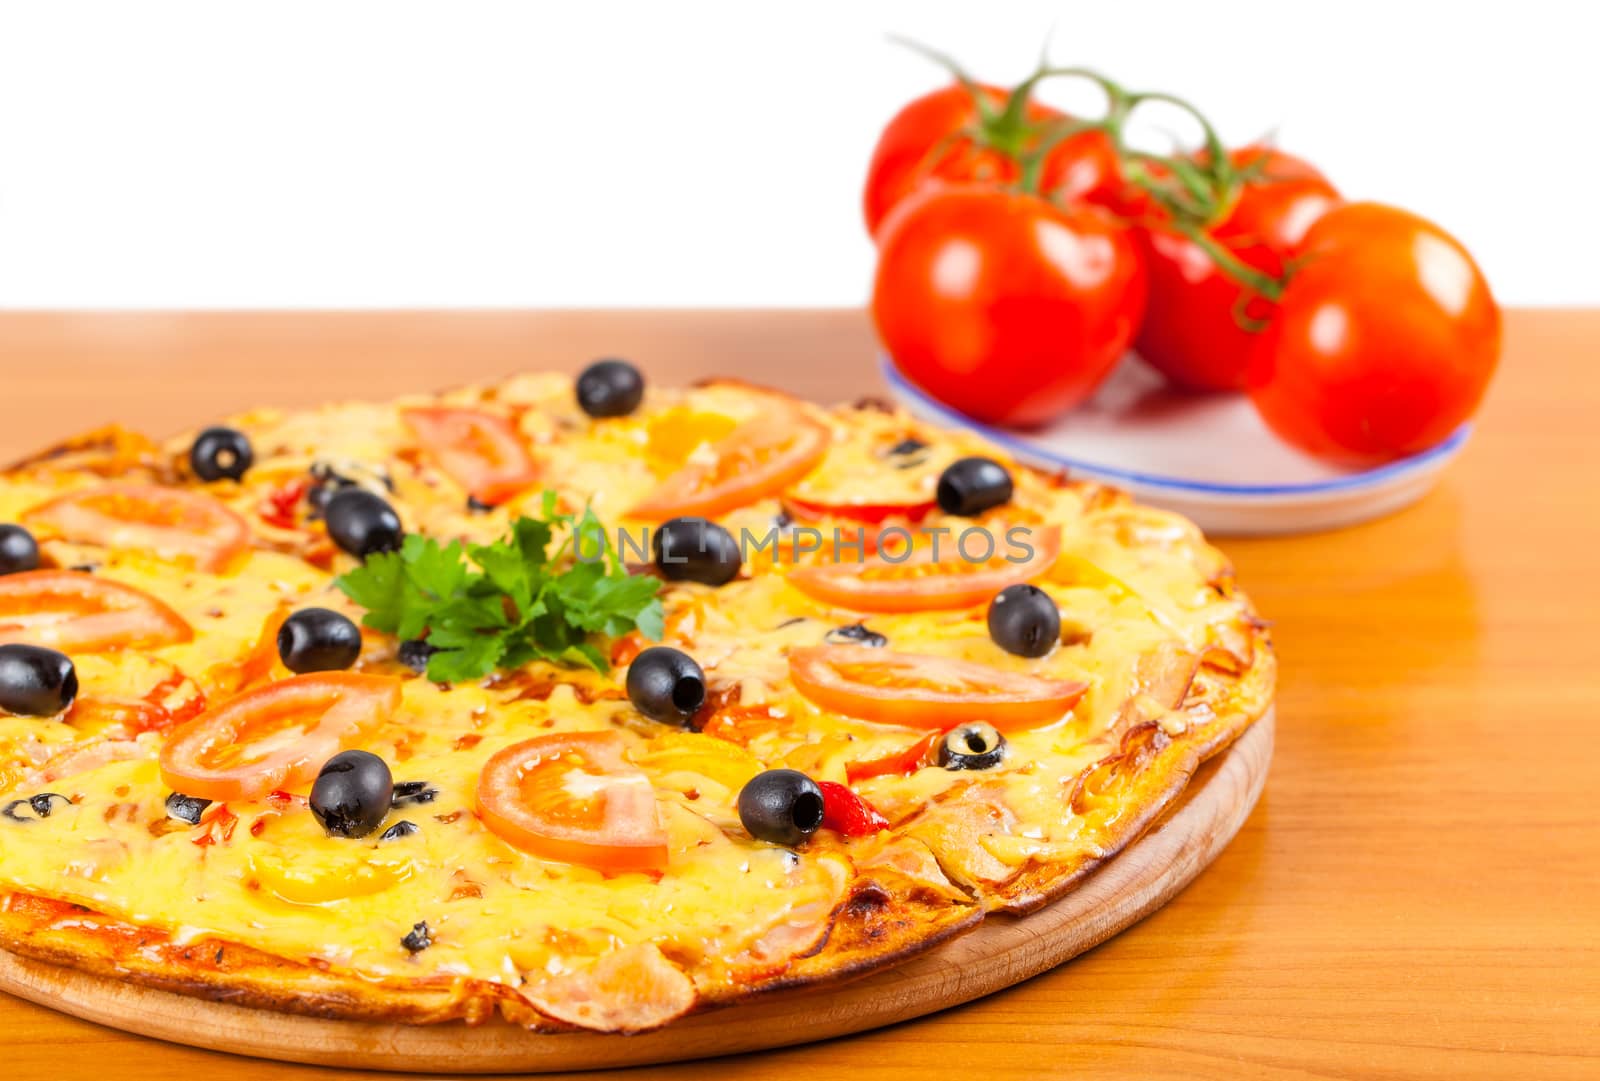 hot fresh a pizza with tomatoes on a wooden background